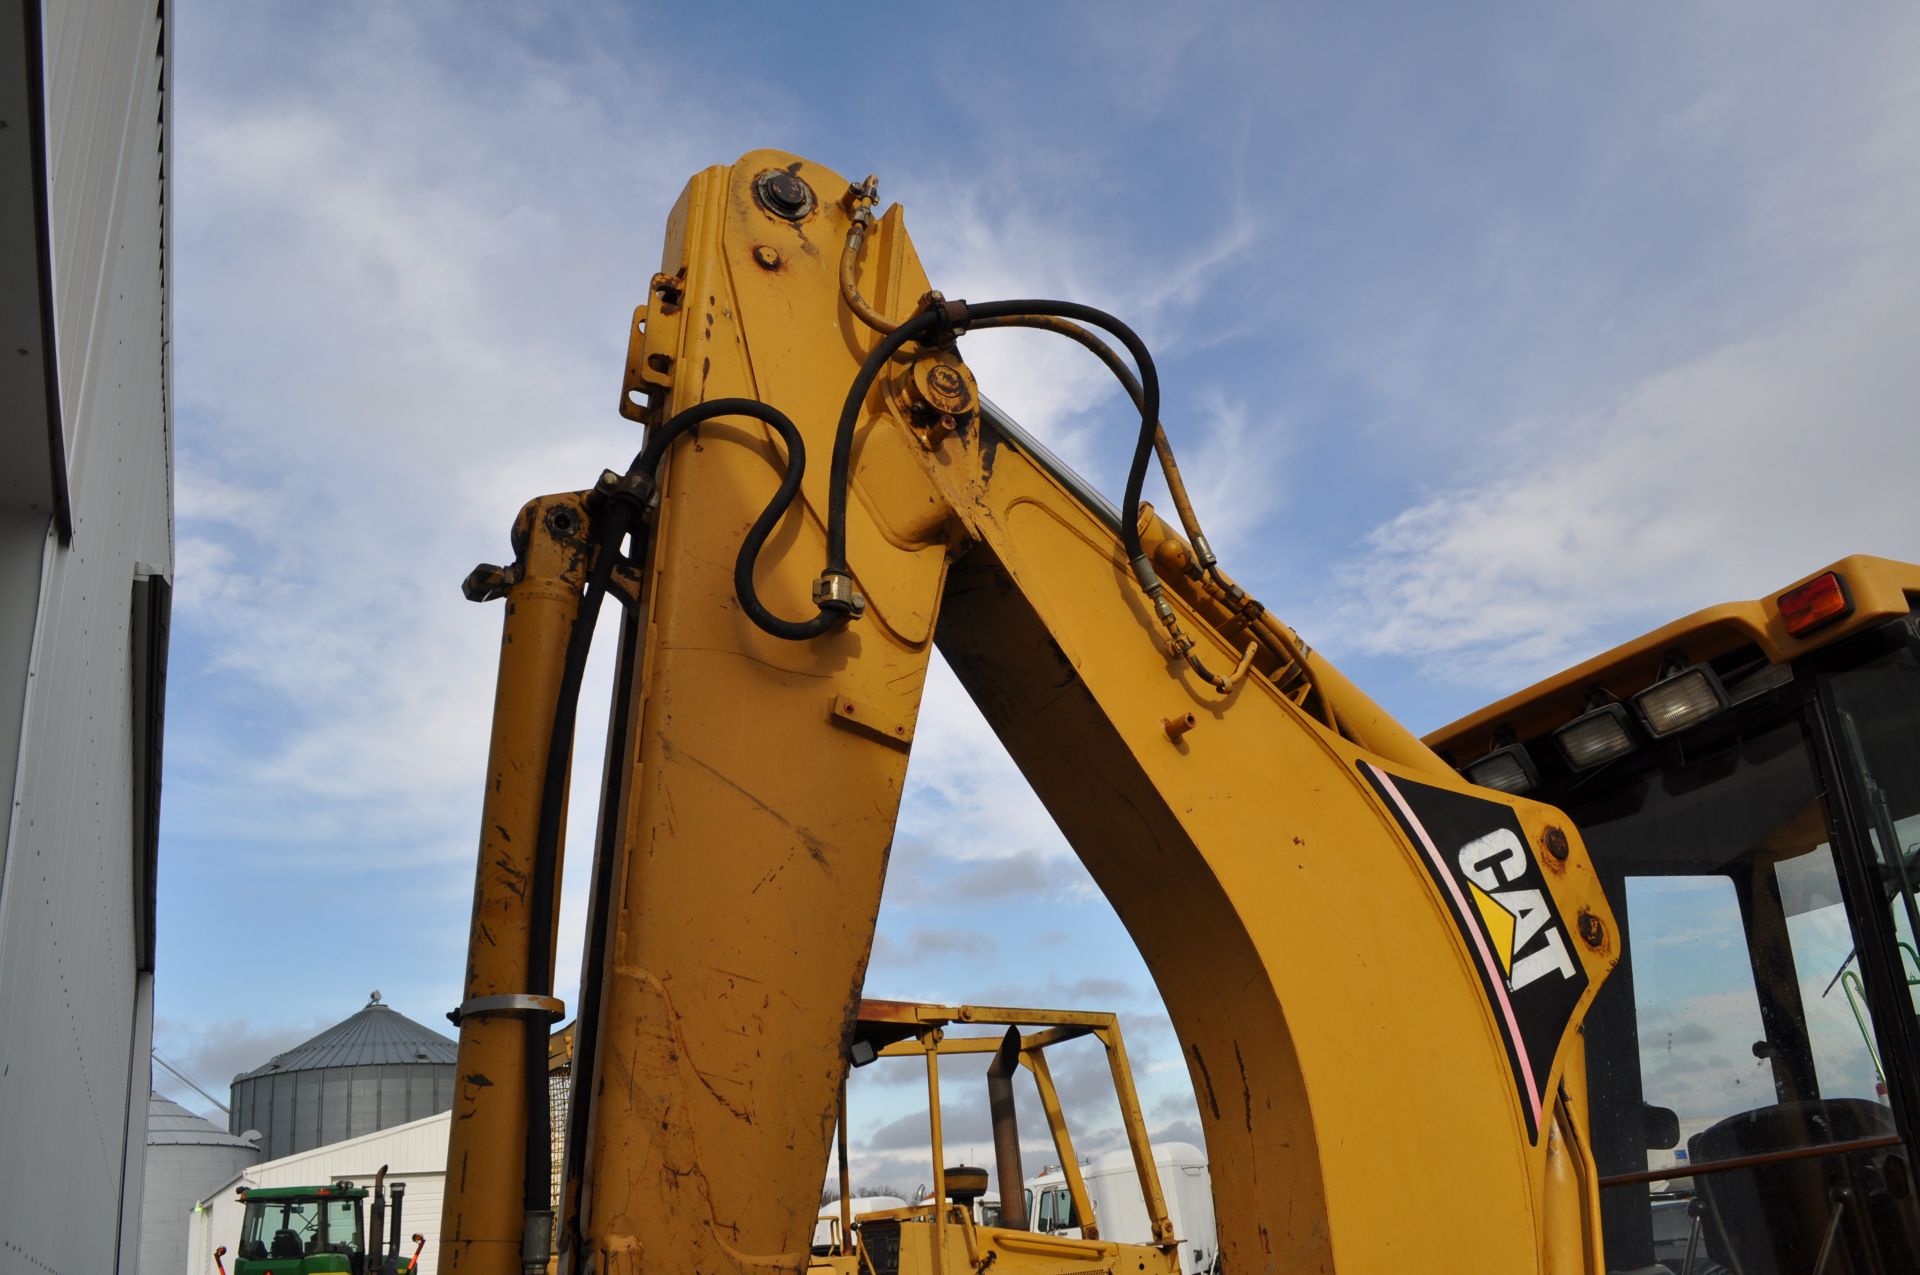 CAT 416C backhoe, 88” bucket, 19.5-24 rear, 12.5/80-18 front, 4x4, 18” and 24” digging buckets - Image 14 of 35